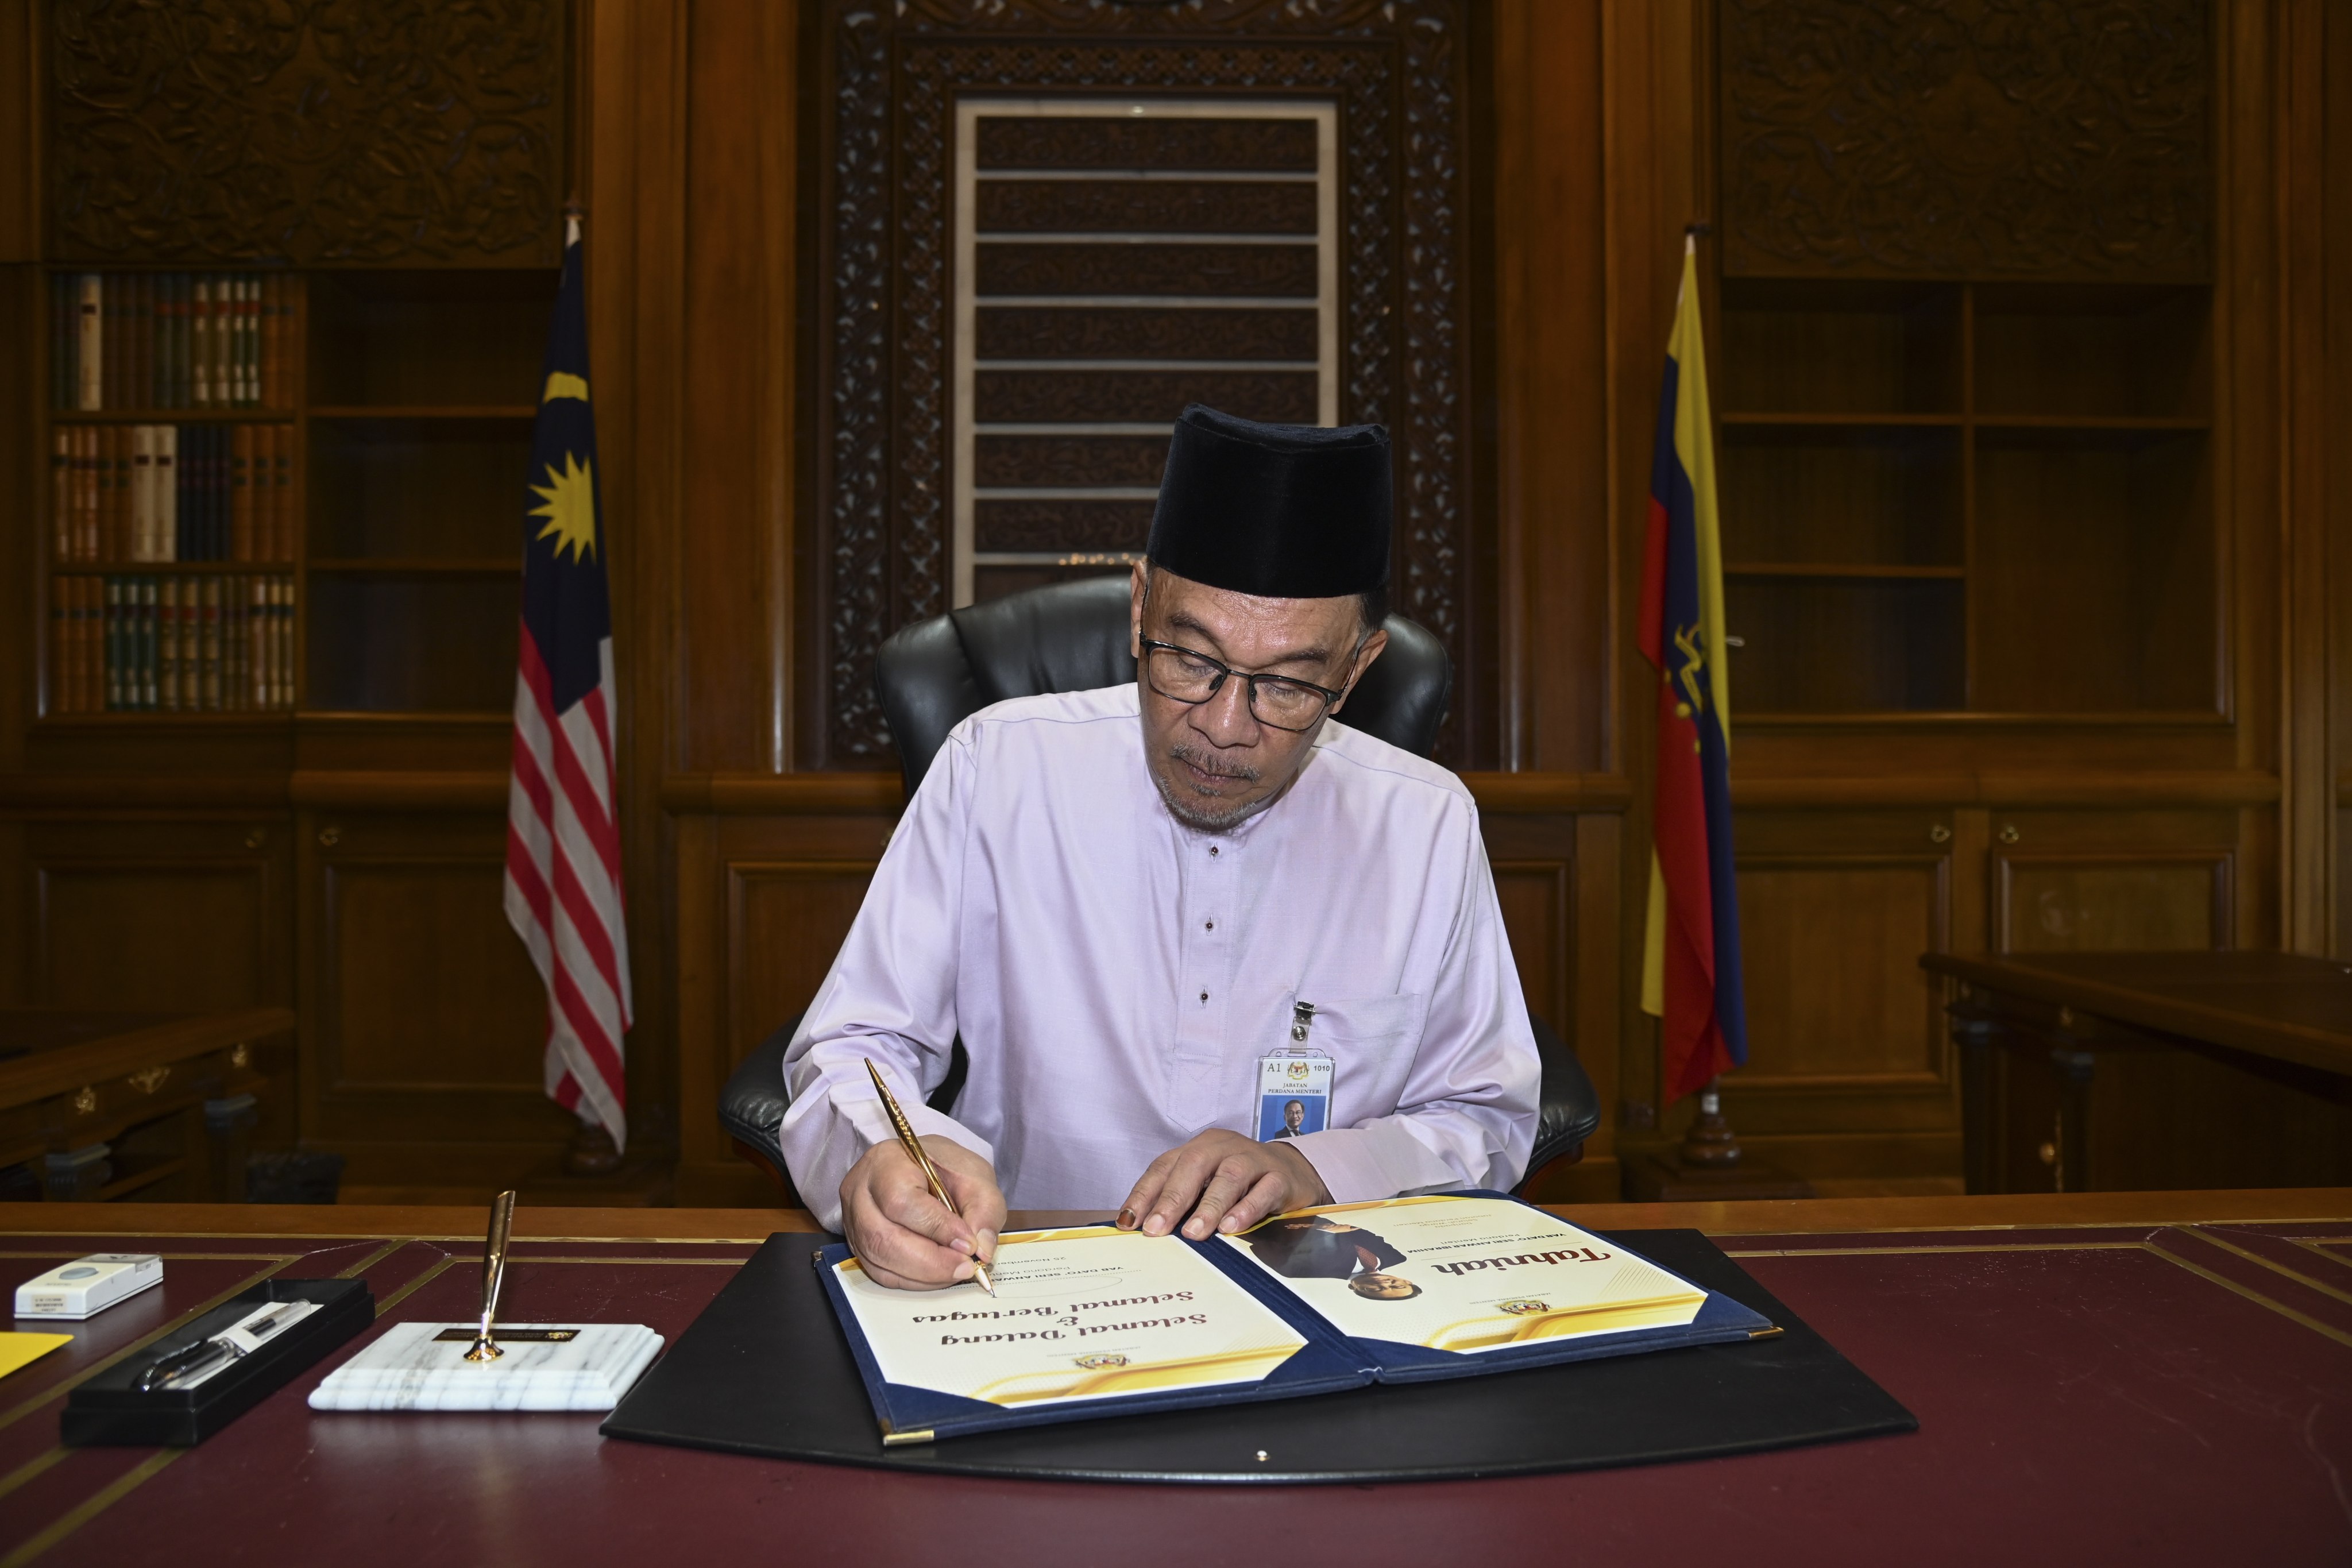 Malaysia’s new Prime Minister Anwar Ibrahim signing documents on his first day at the Prime Minister’s Office in Putrajaya. Photo: Malaysia Information Ministry/EPA-EFE